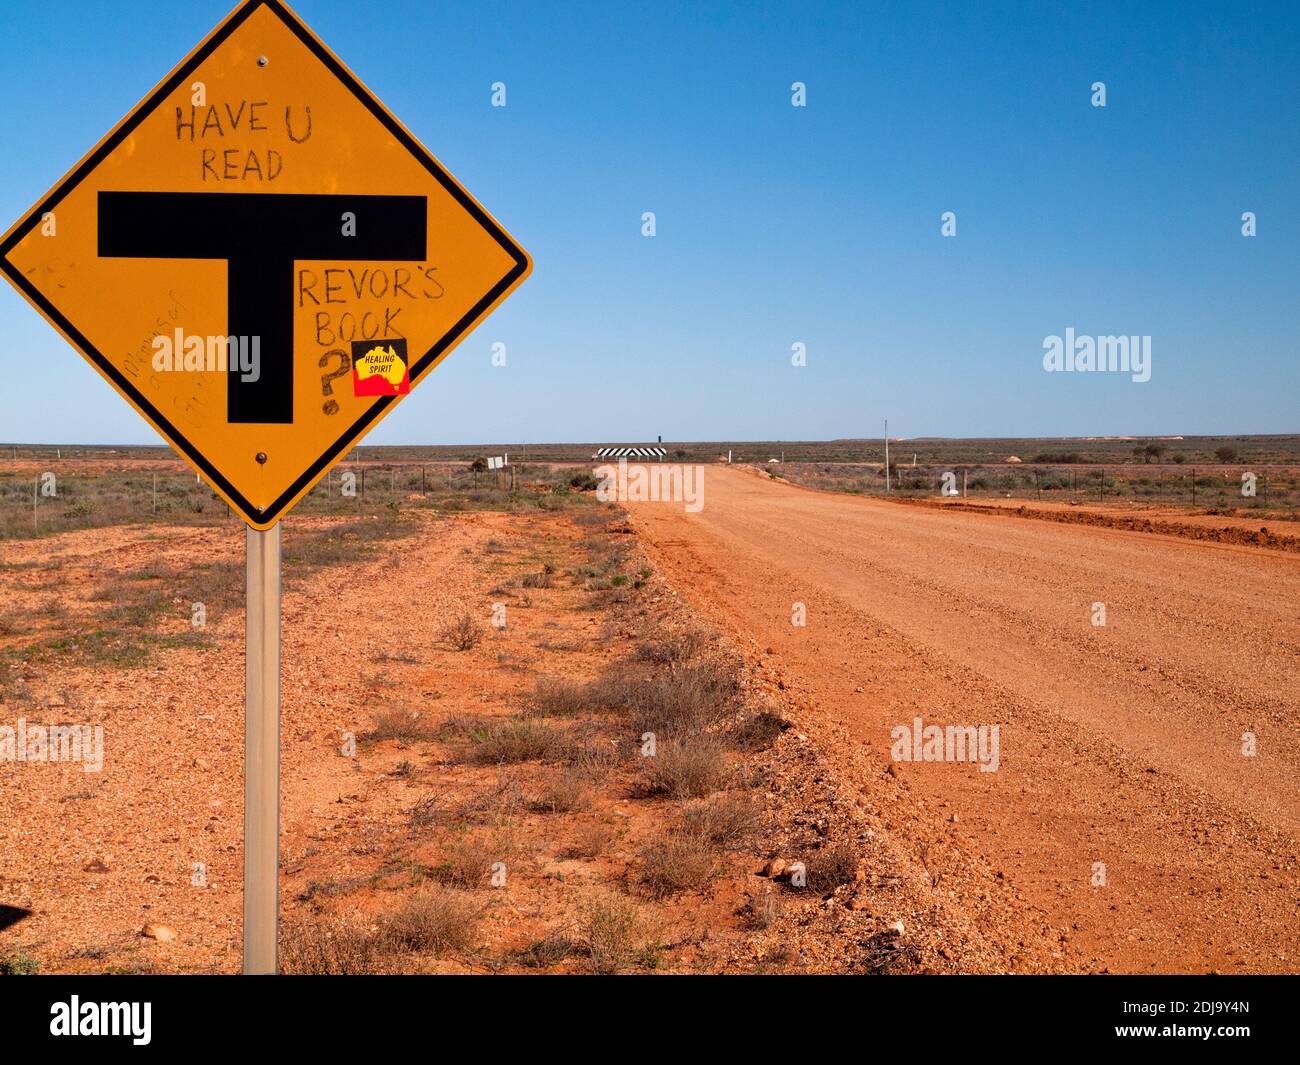 'Have you read Trevor's book?' graffiti on a T-intersection road sign at Coober Pedy, South Australia Stock Photo